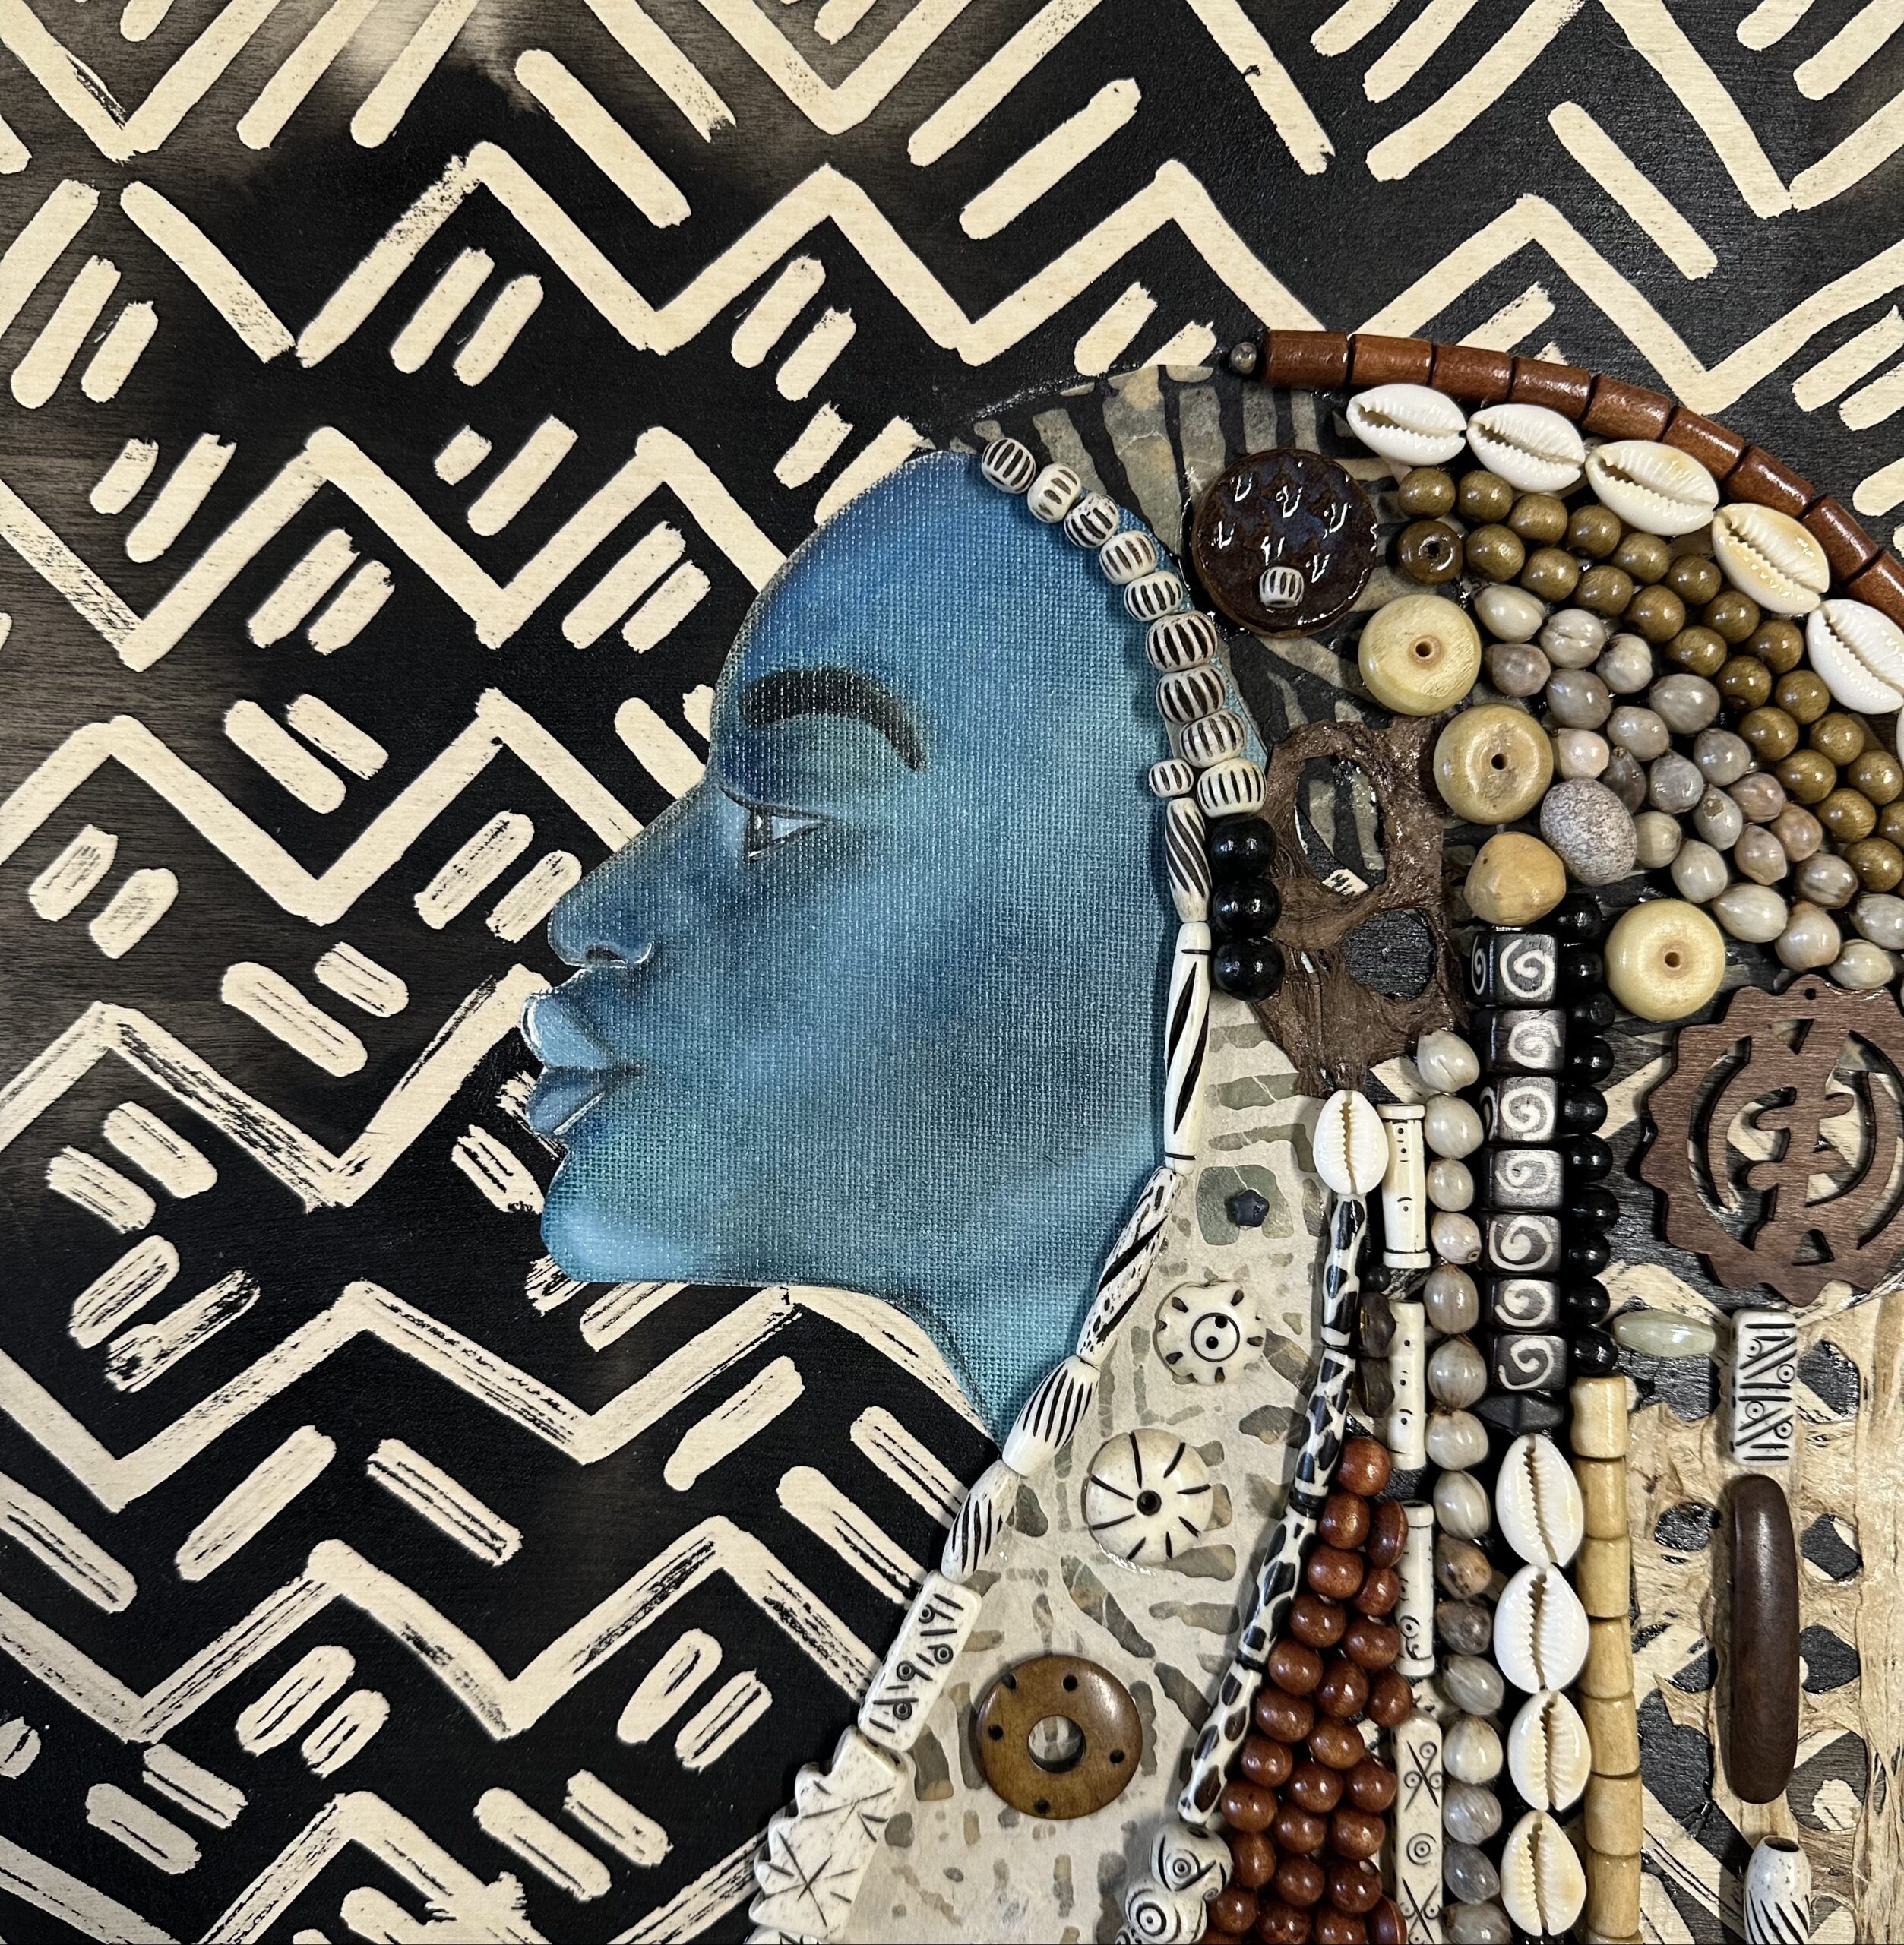 A mixed media artwork of a woman with blue skin with hair made up of various shells, seeds, and other found objects.